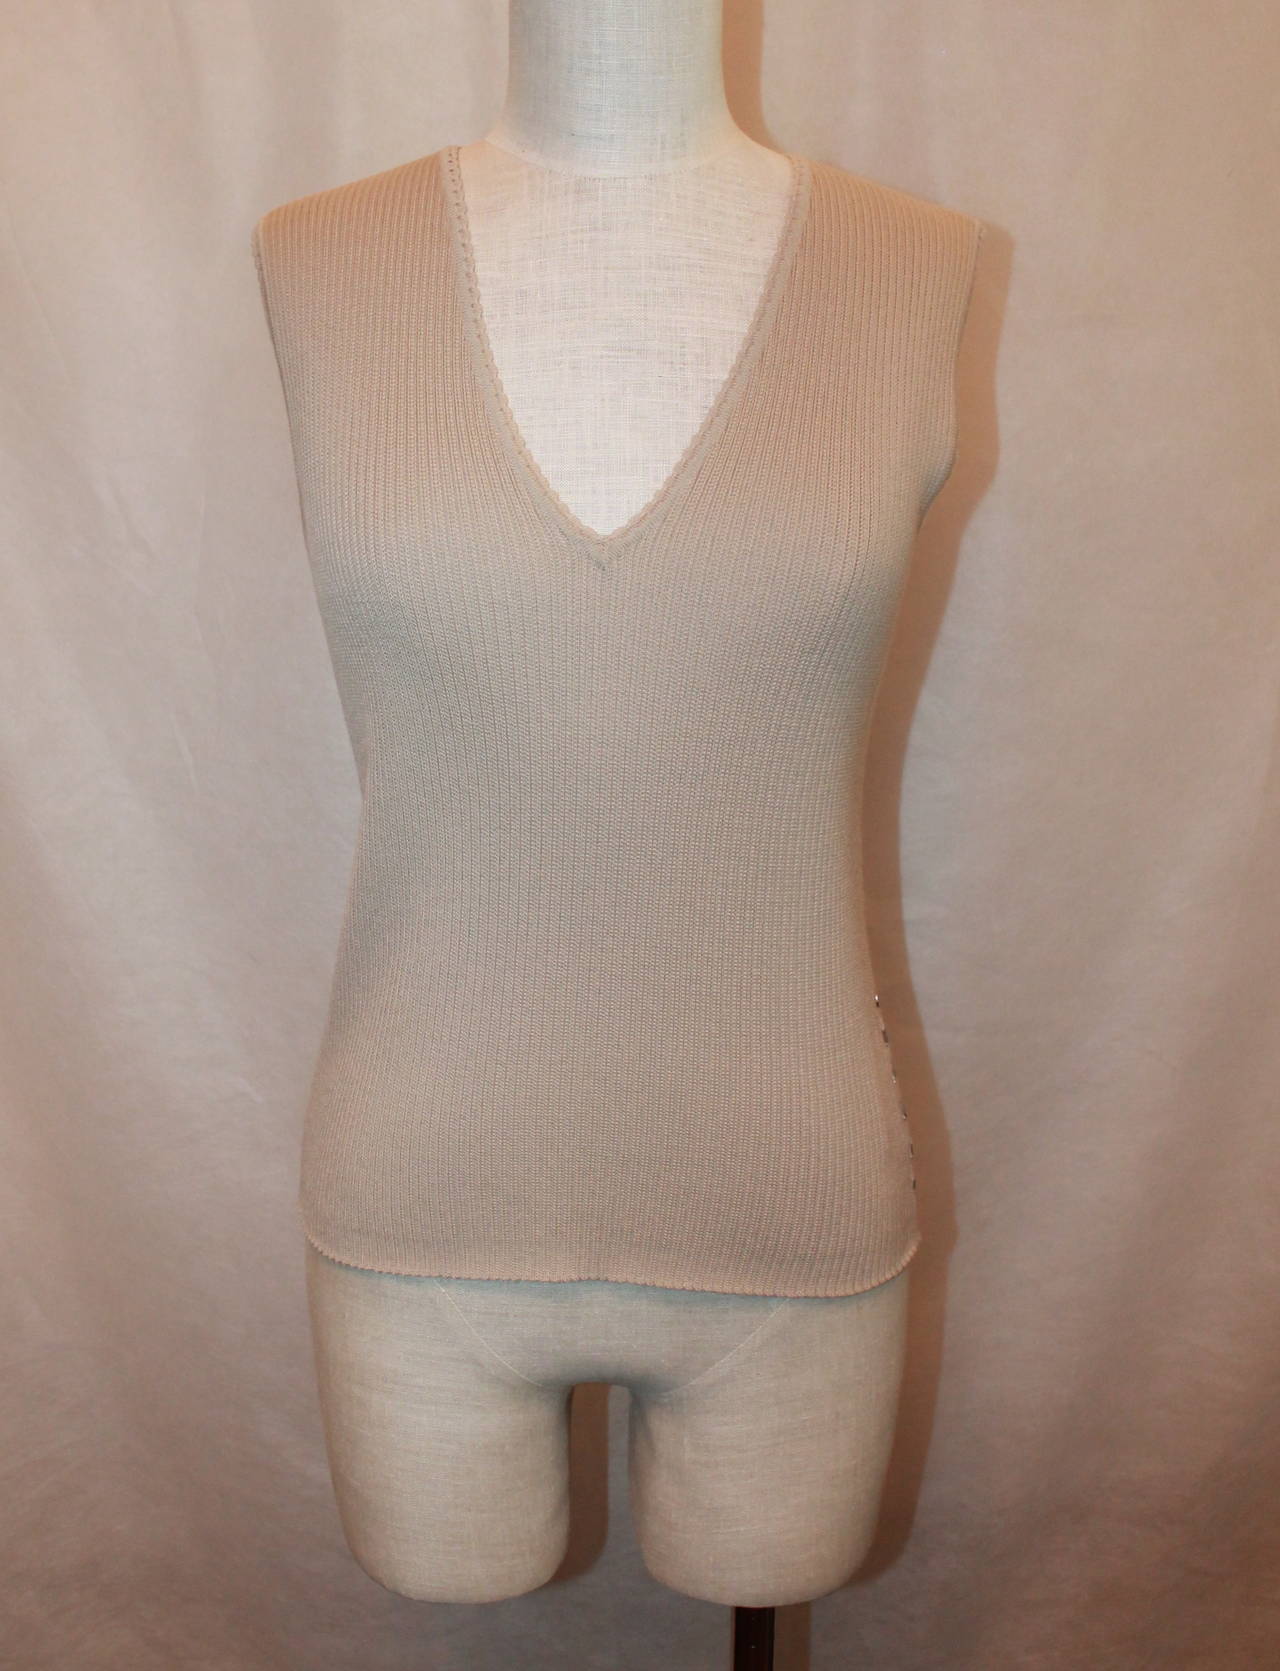 Chanel 1999 Vintage Tan Knit Sleeveless Top with 